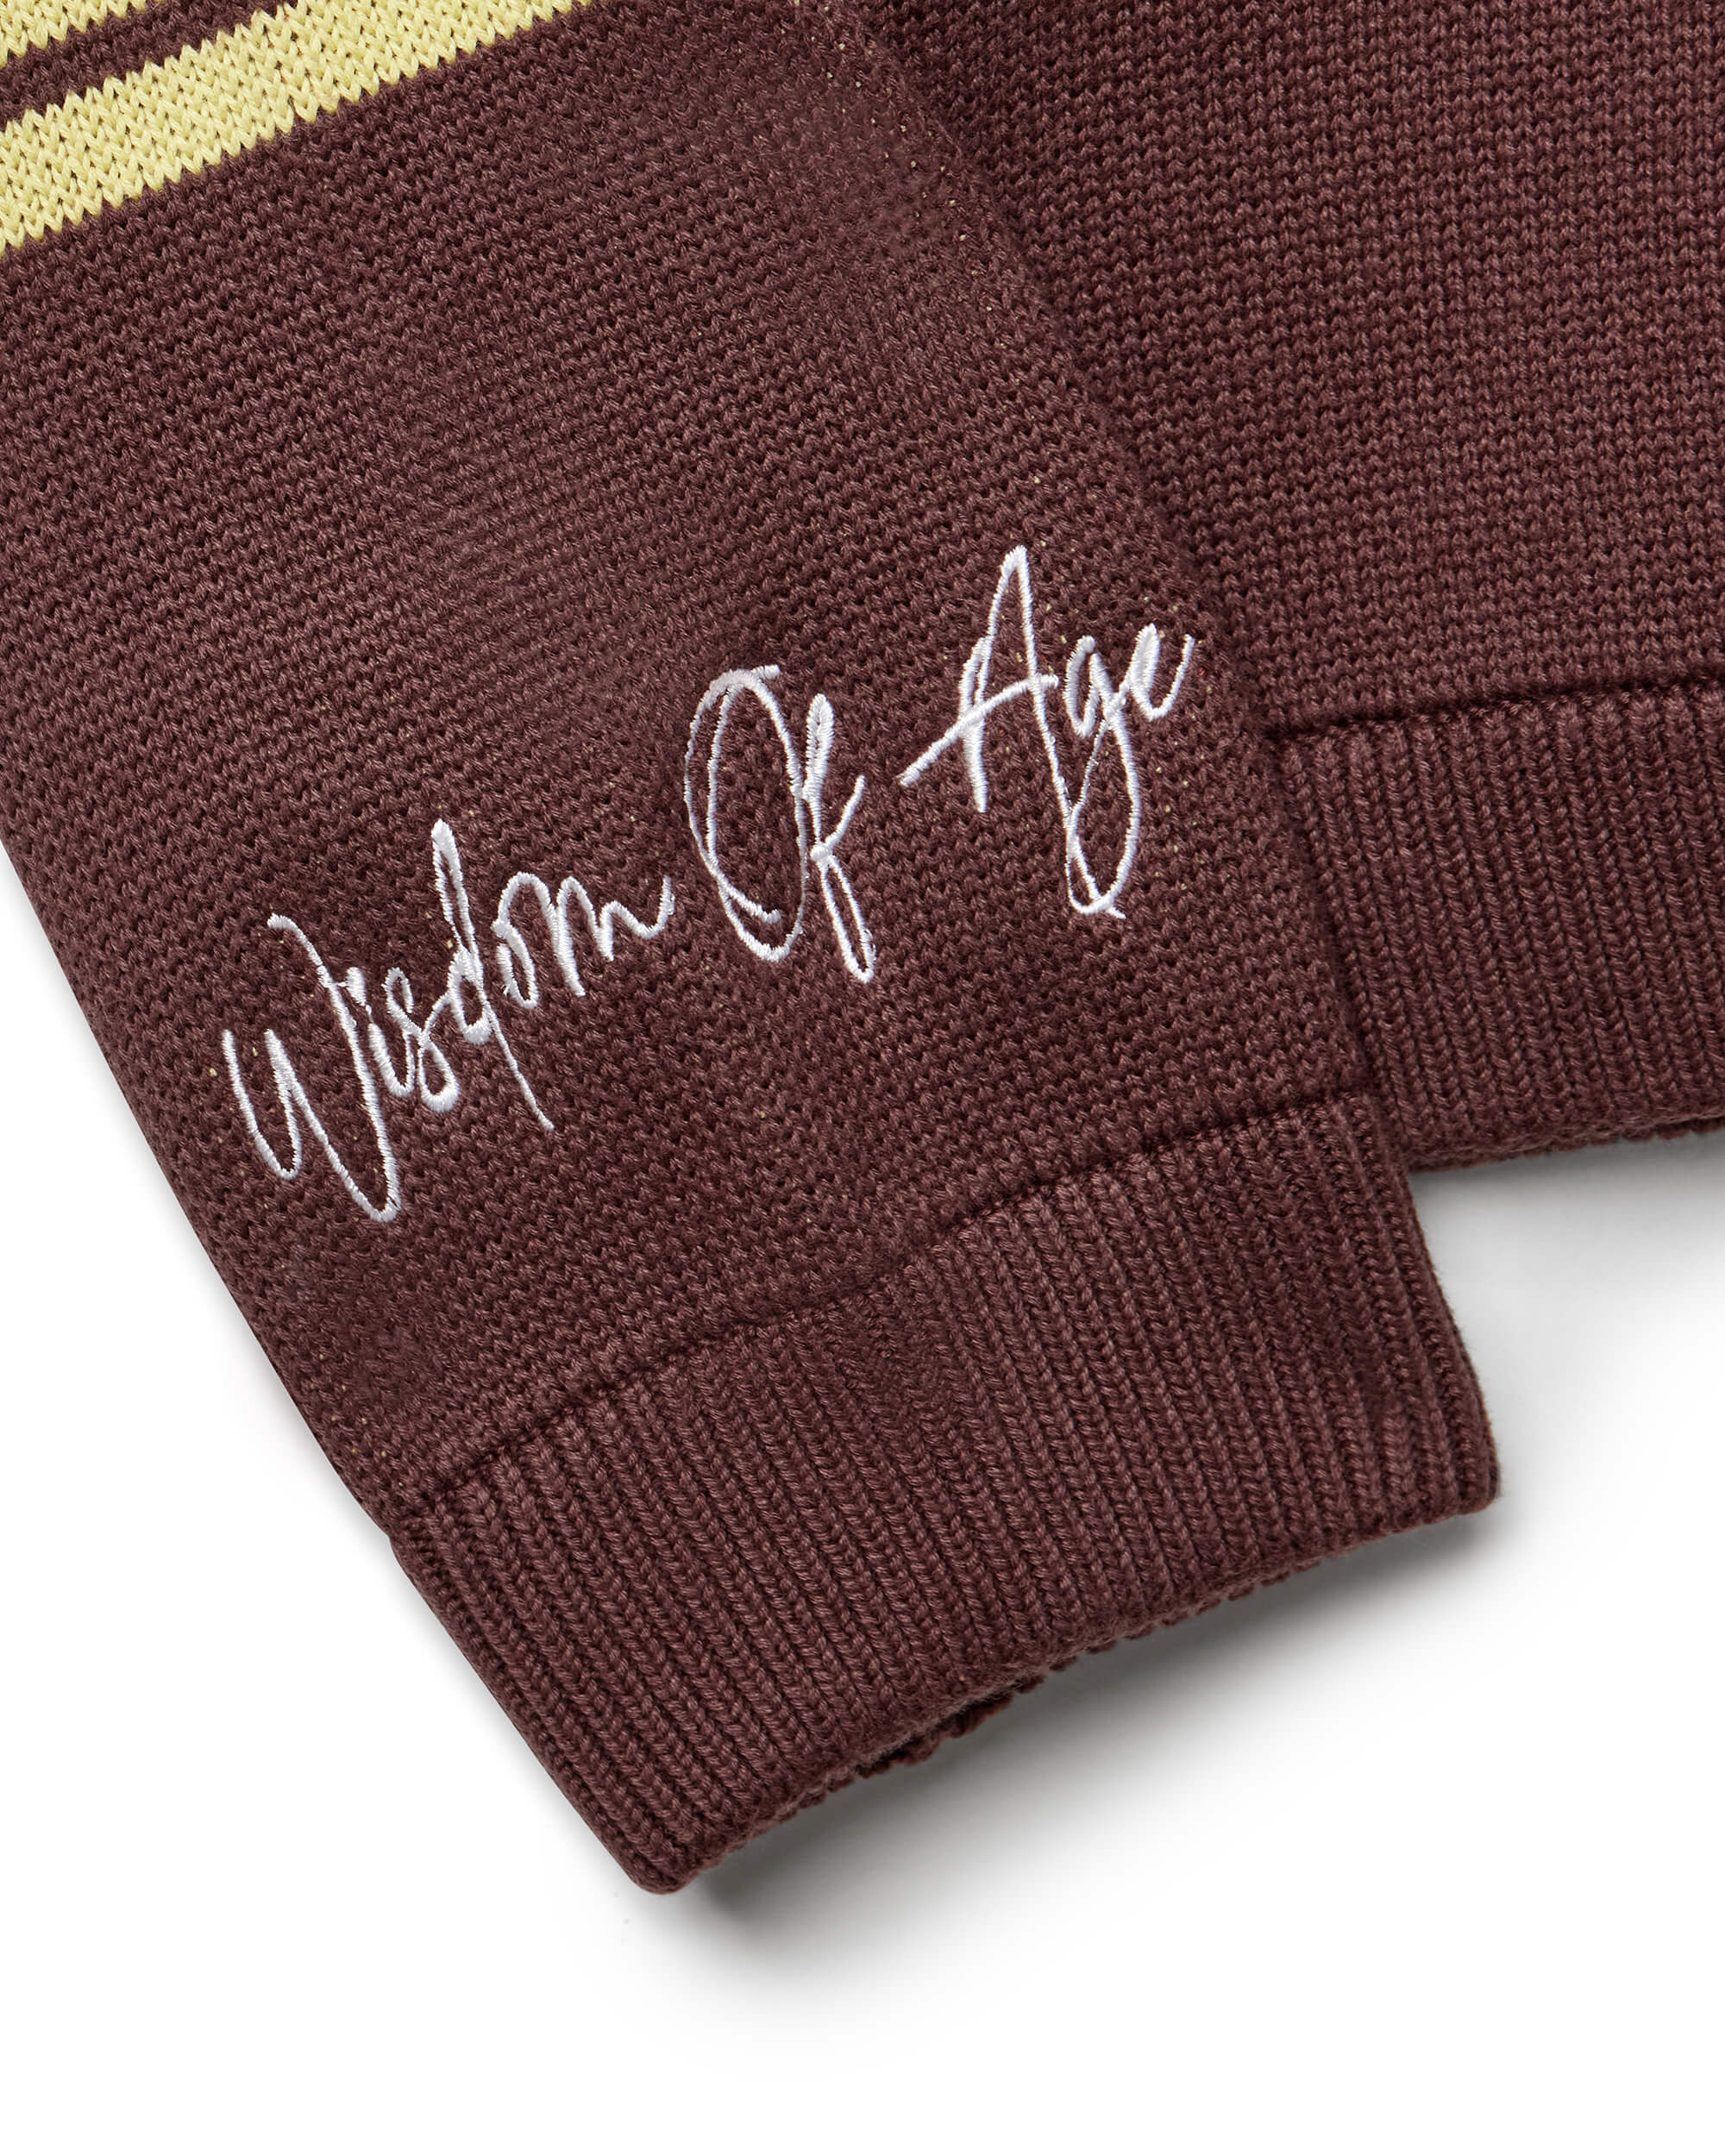 Right sleeve with the brand name "Wisdom of Age" written near the cuff end in a handwritten script cursive